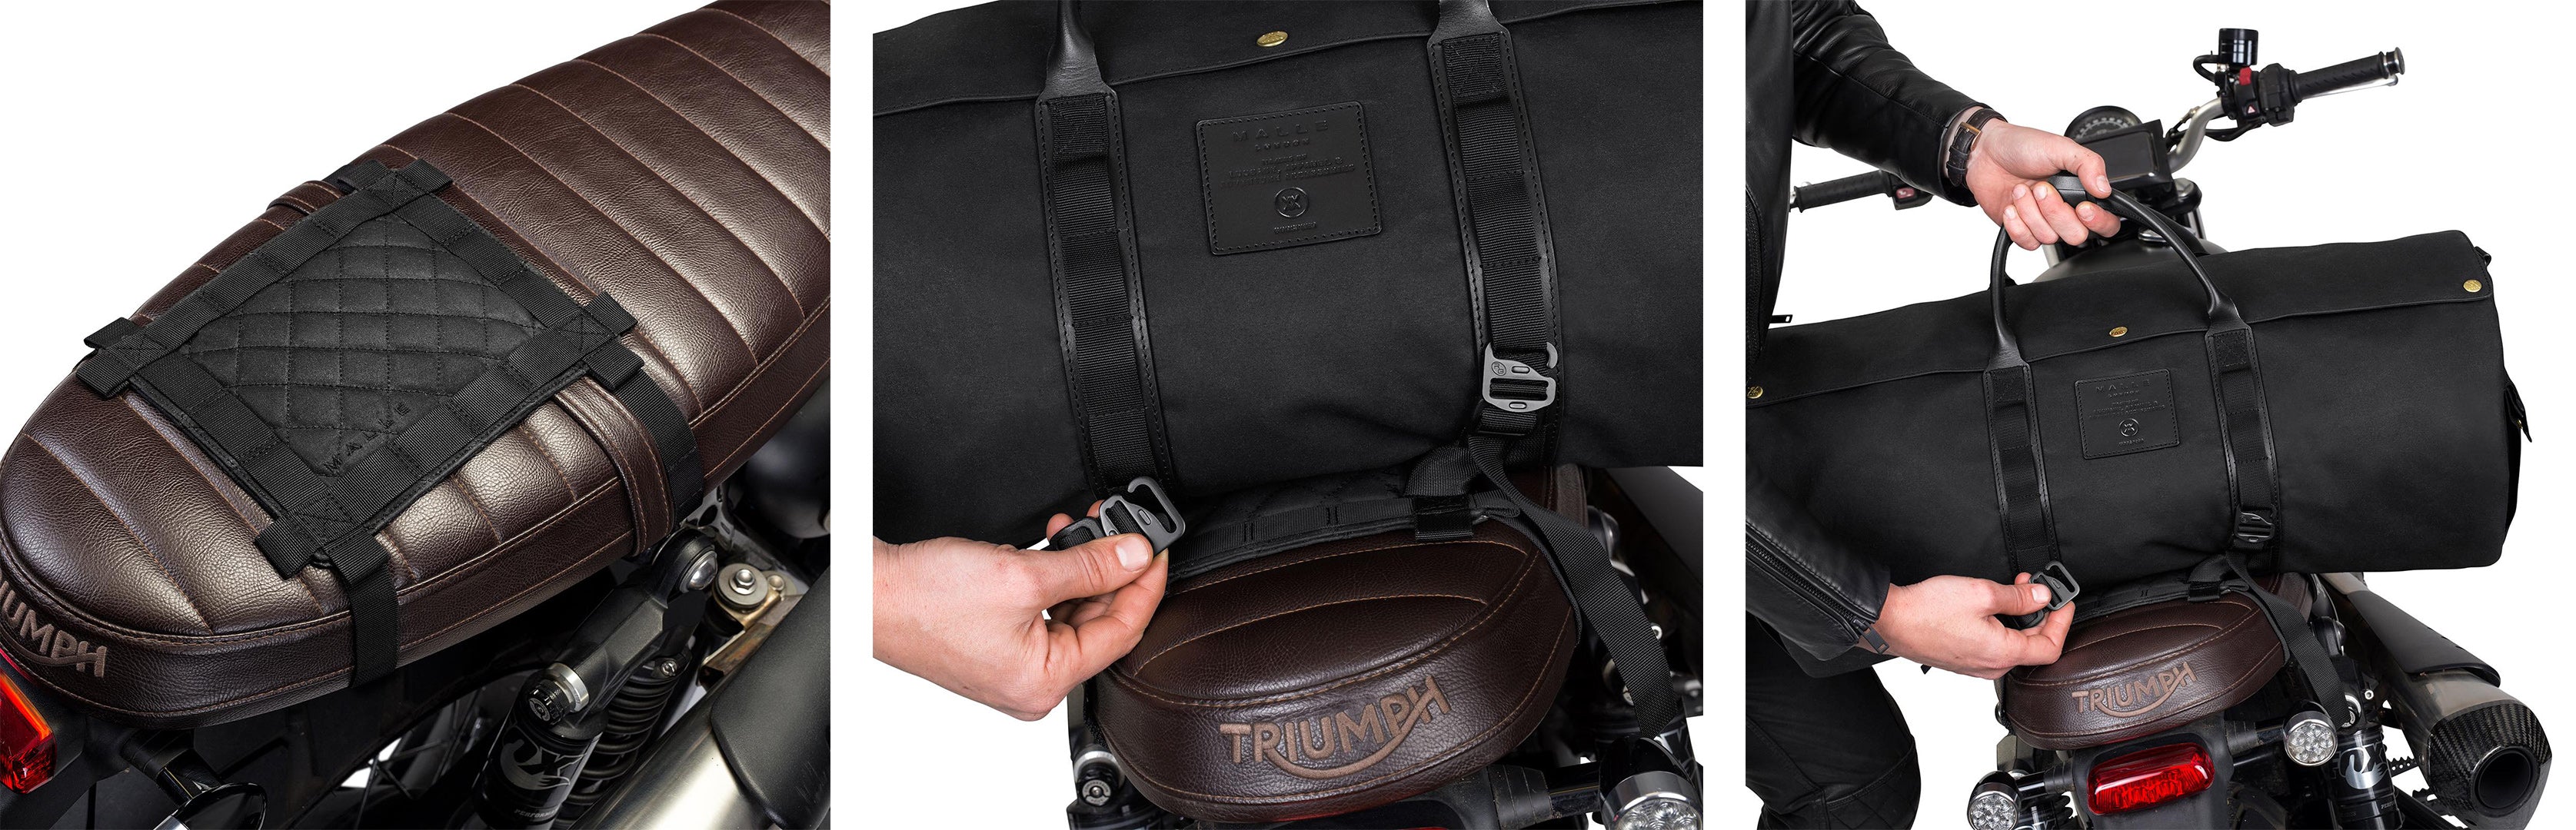 Installing a Malle Duffel on your triumph